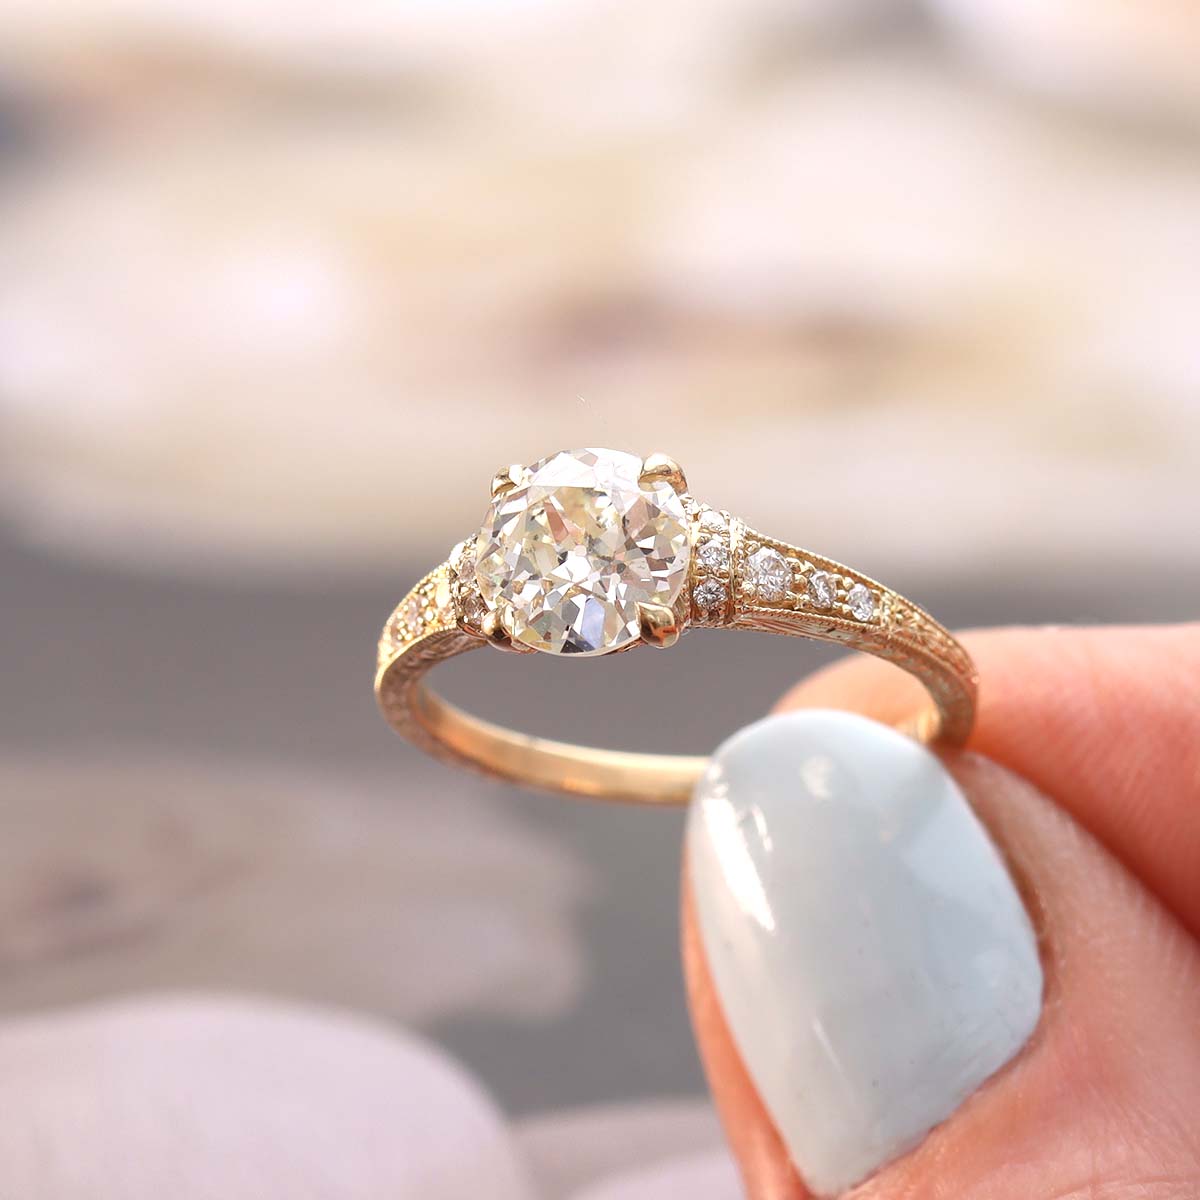 The Lily Engagment Ring With An Old European Cut Diamond #3319-8